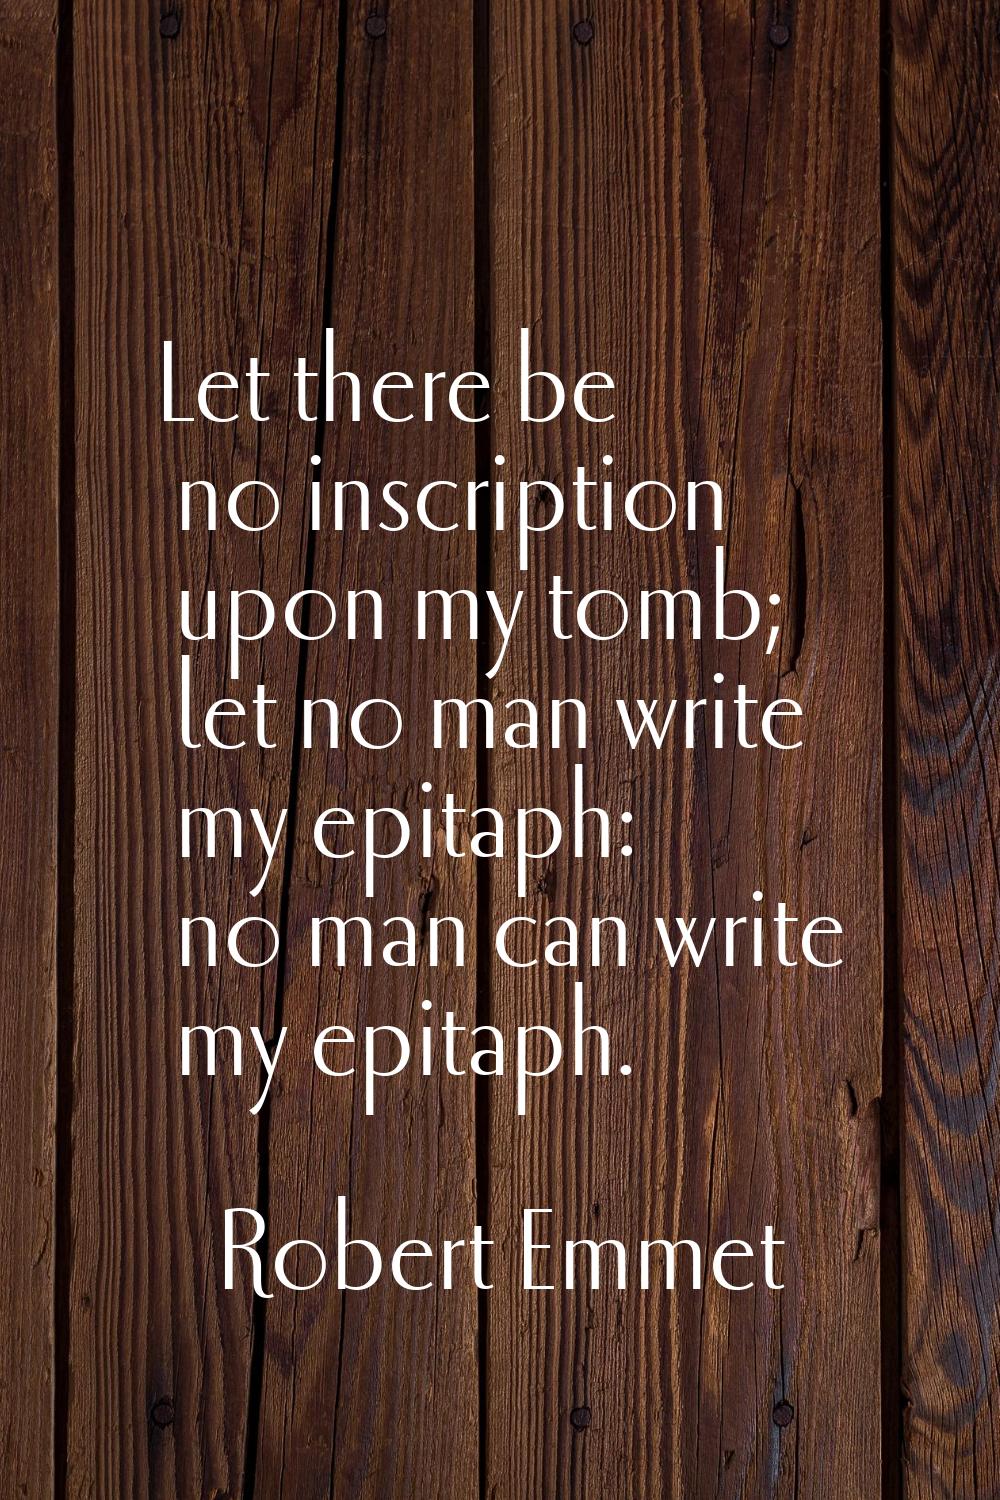 Let there be no inscription upon my tomb; let no man write my epitaph: no man can write my epitaph.